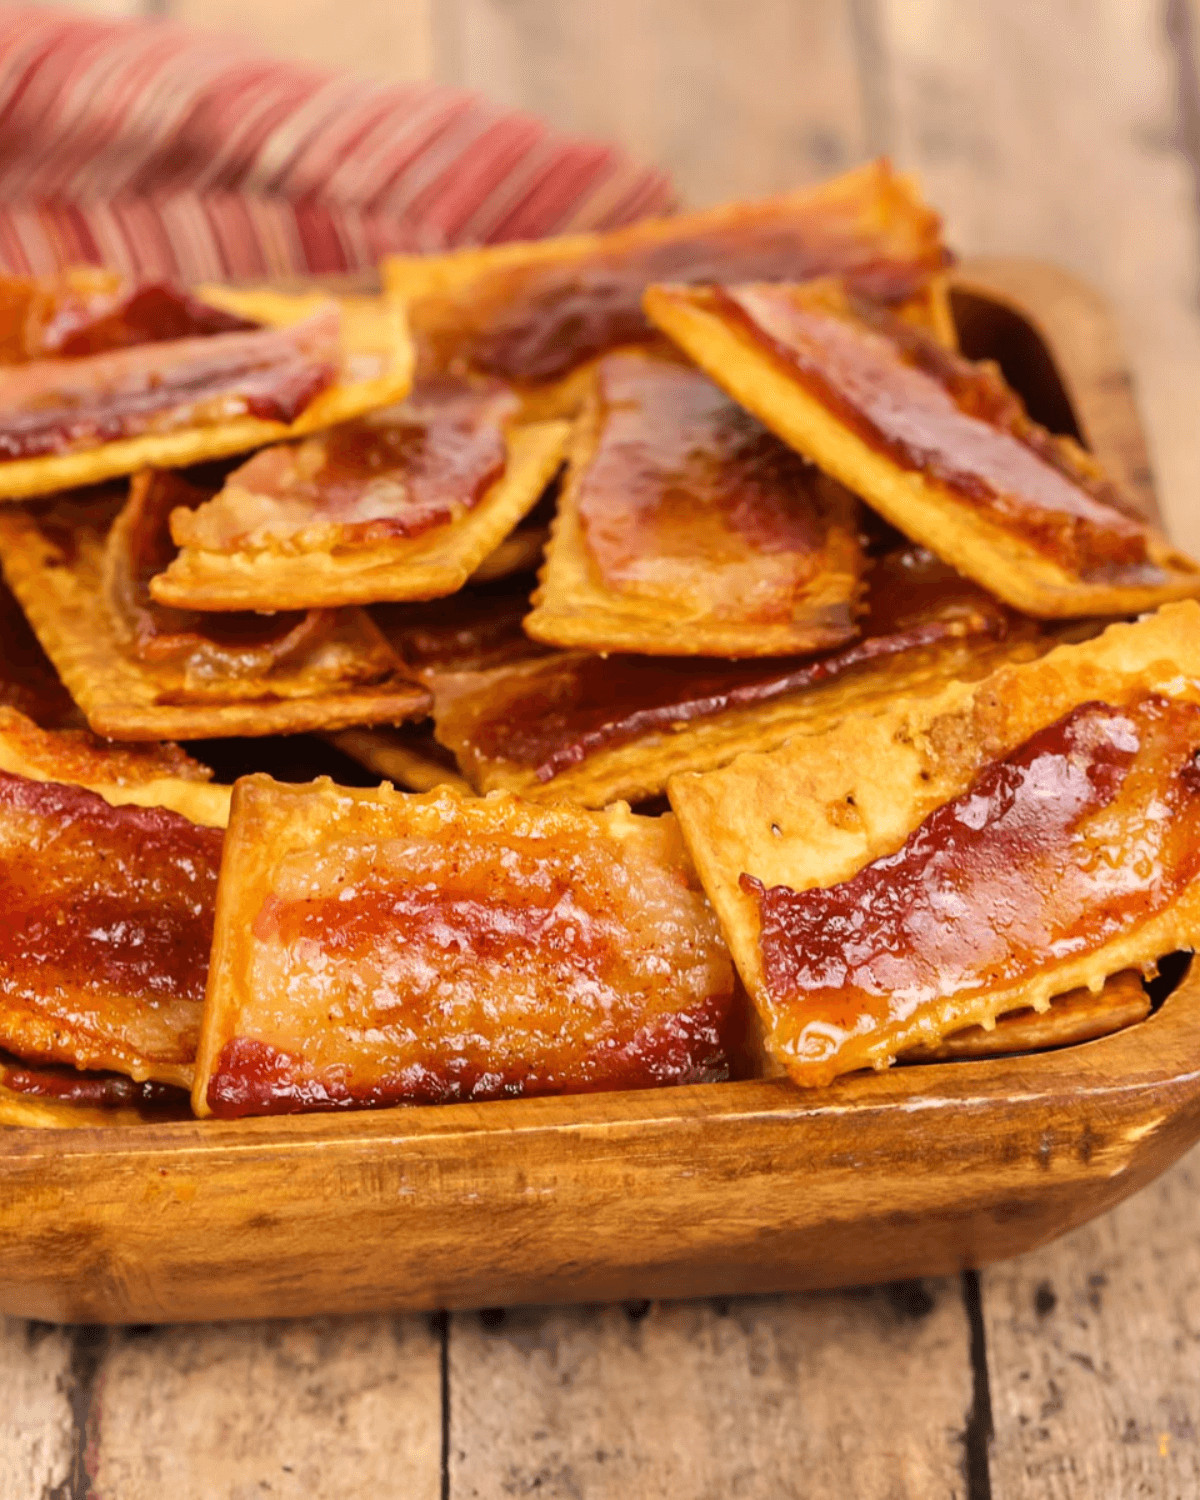 Bacon crackers displayed in a wooden bowl on top of a rustic wooden table.